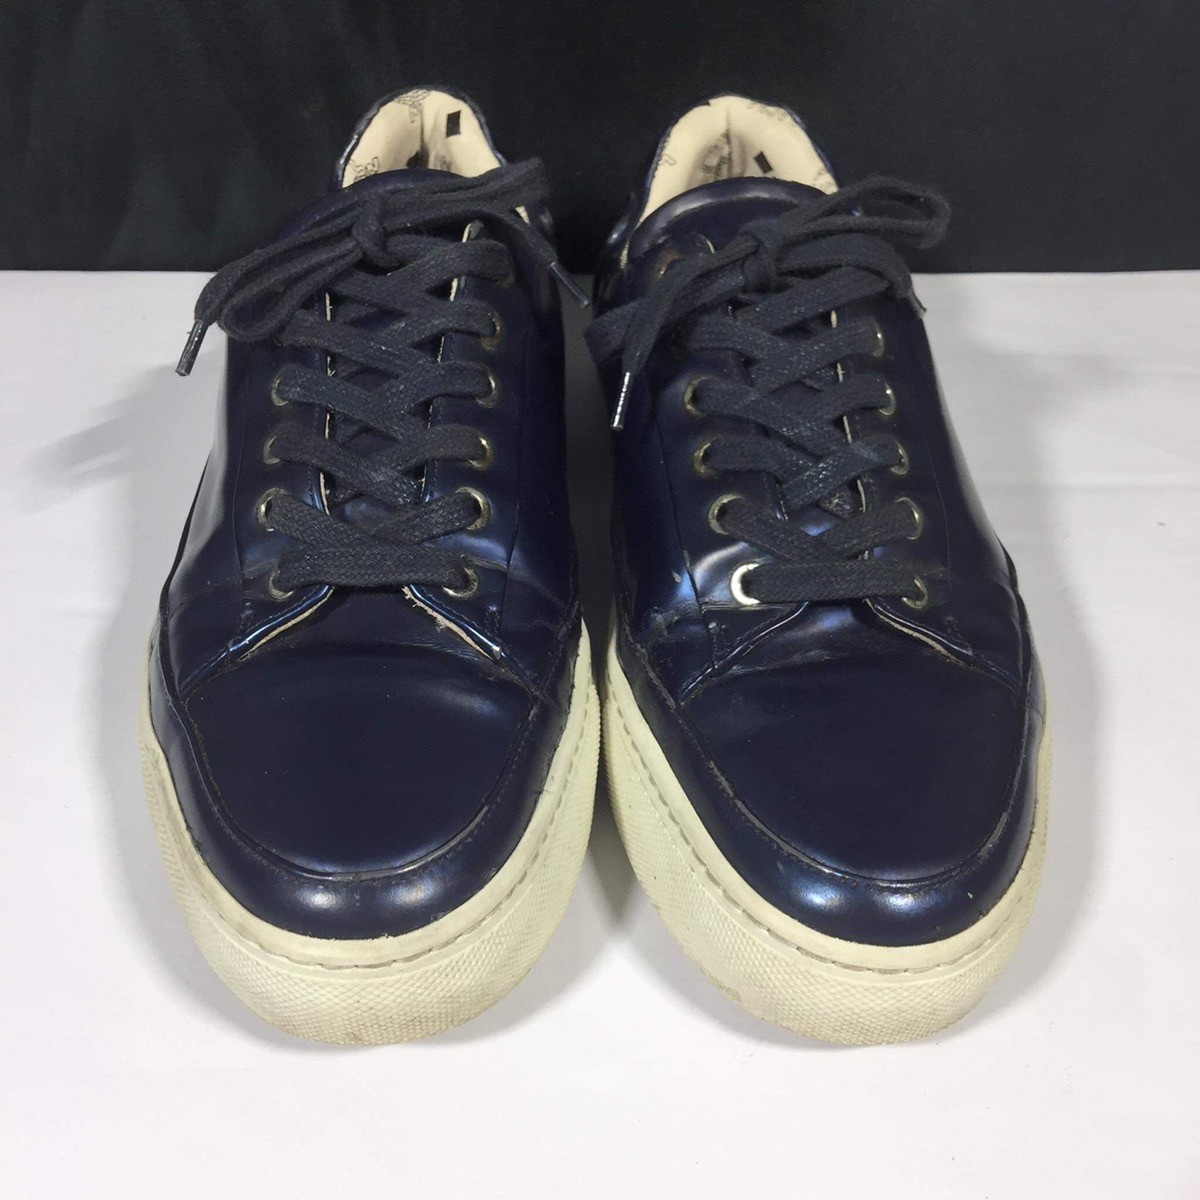 Patent Leather Sneaker Low - 3